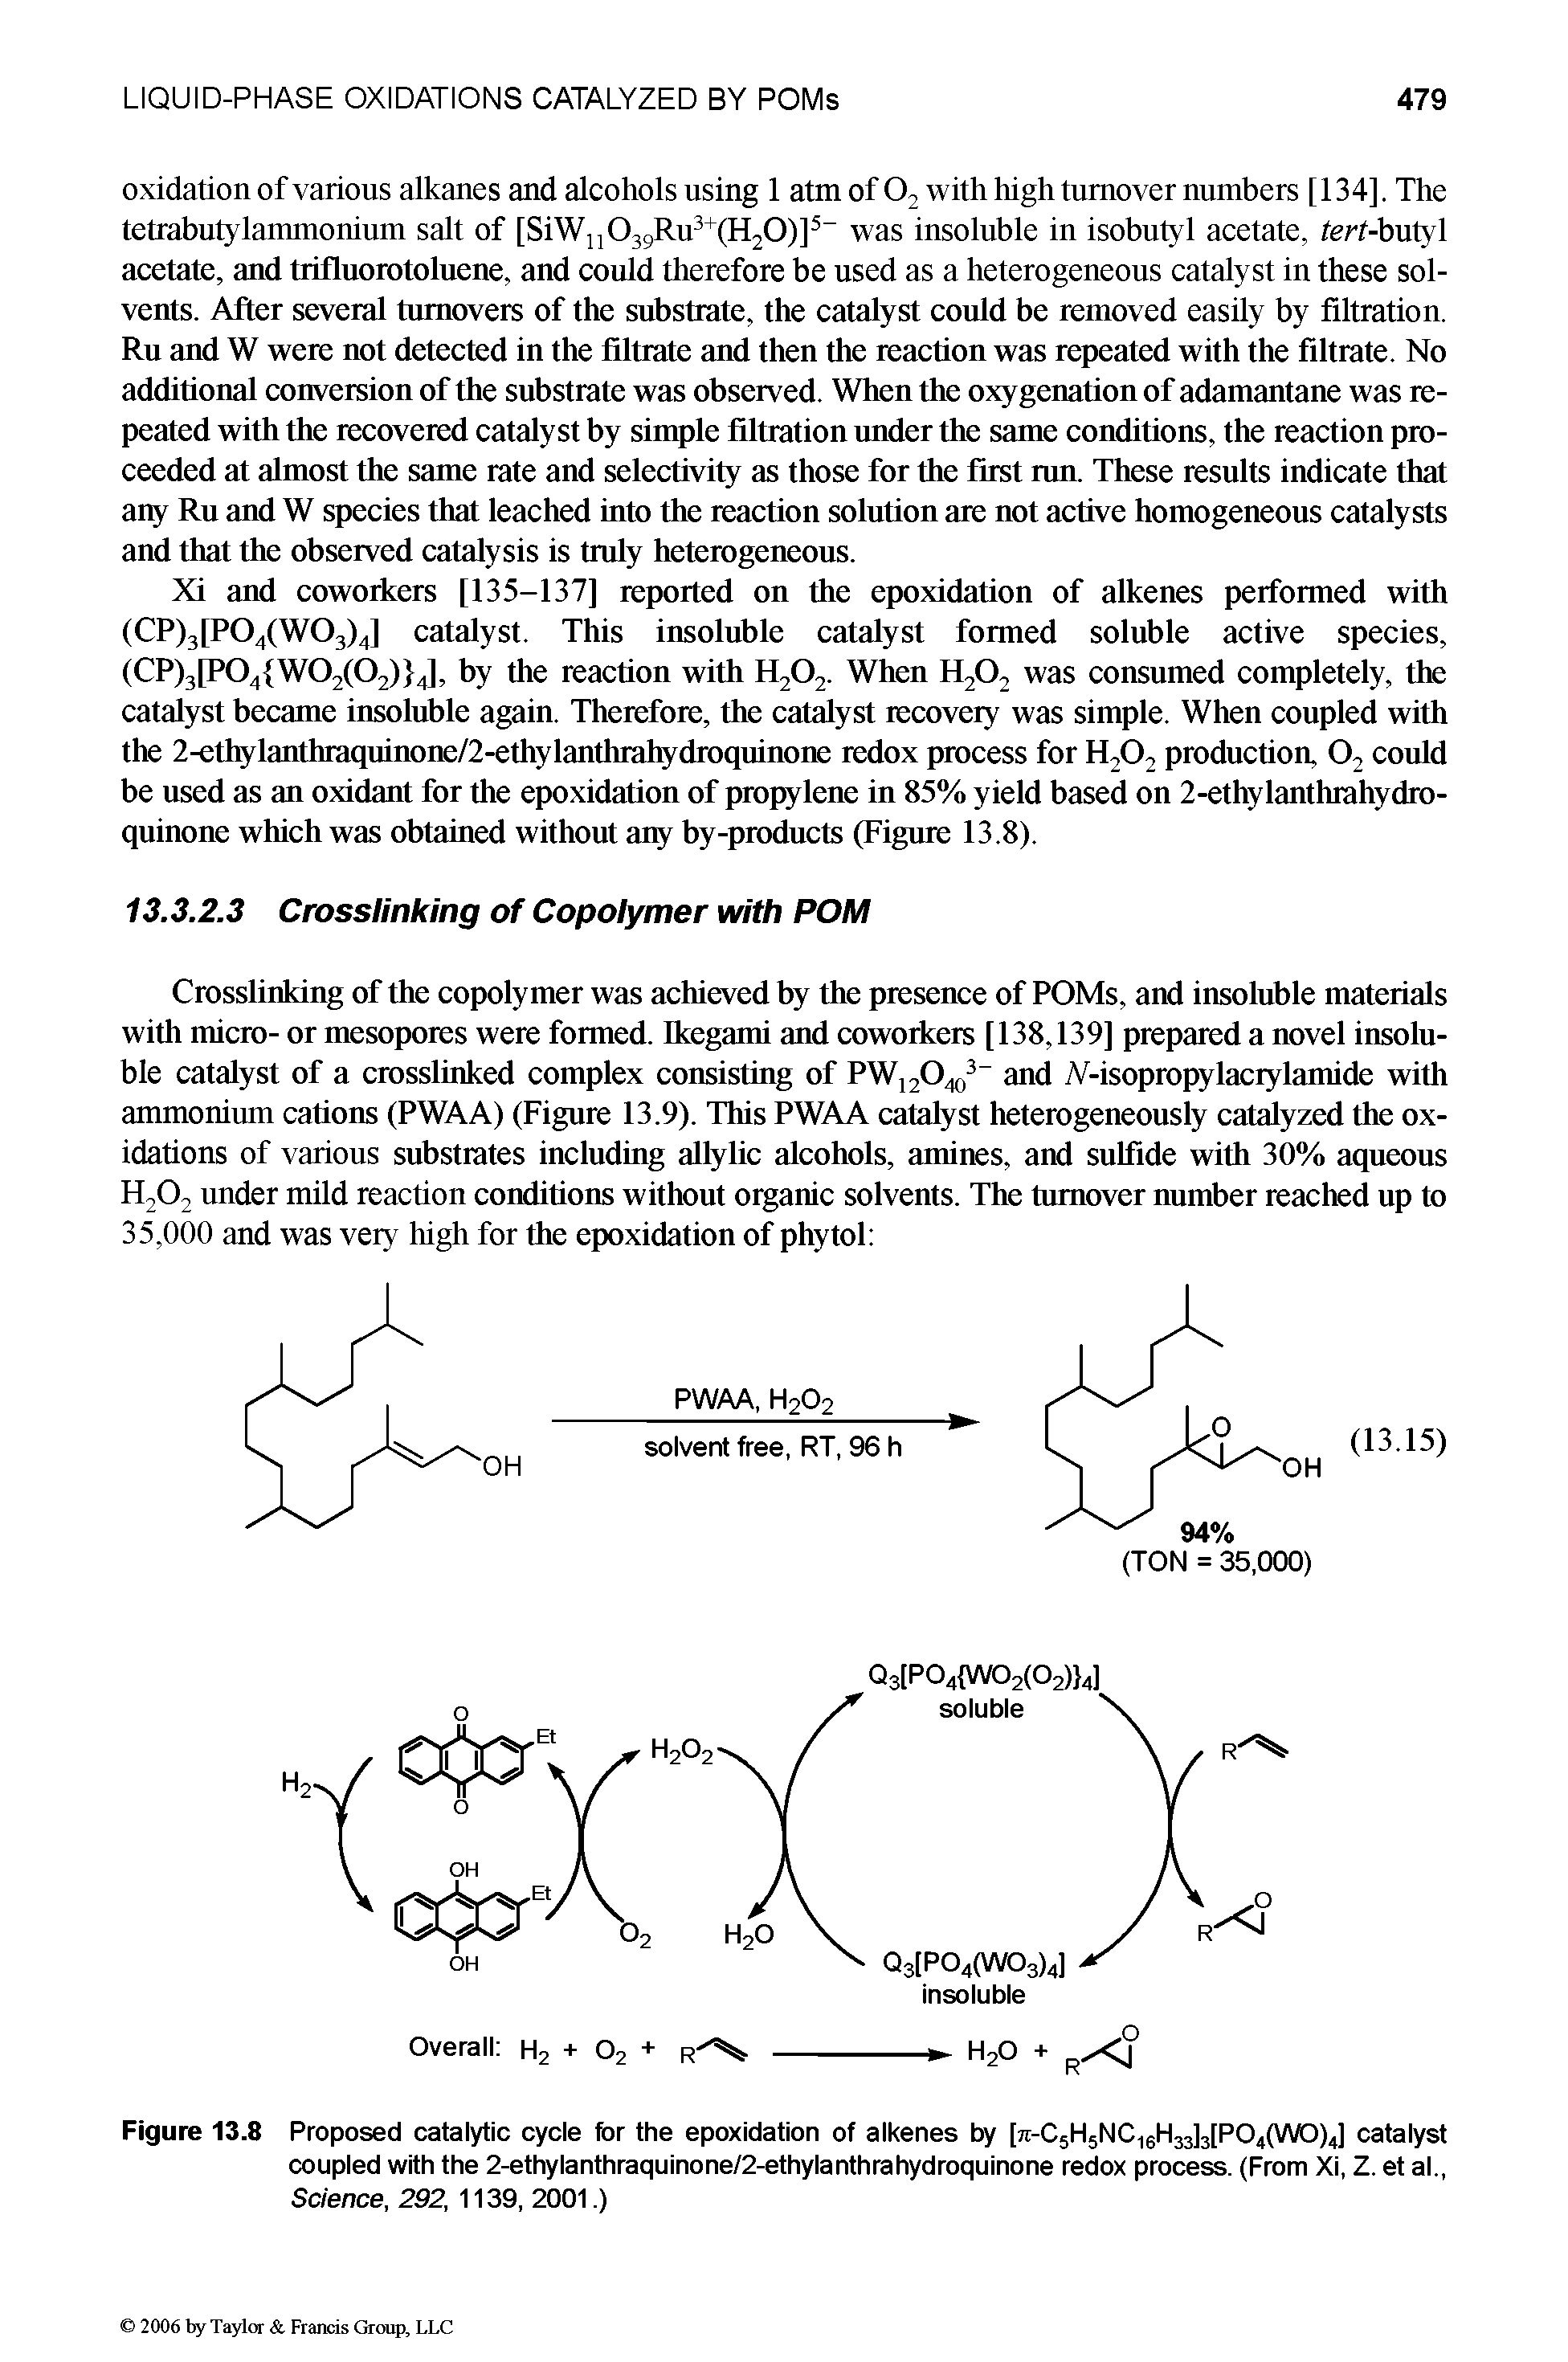 Figure 13.8 Proposed catalytic cycle for the epoxidation of alkenes by [jc-C5H5NC16H33]3[P04(WO)4] catalyst coupled with the 2-ethylanthraquinone/2-ethylanthrahydroquinone redox process. (From Xi, Z. et al., Science, 292, 1139, 2001.)...